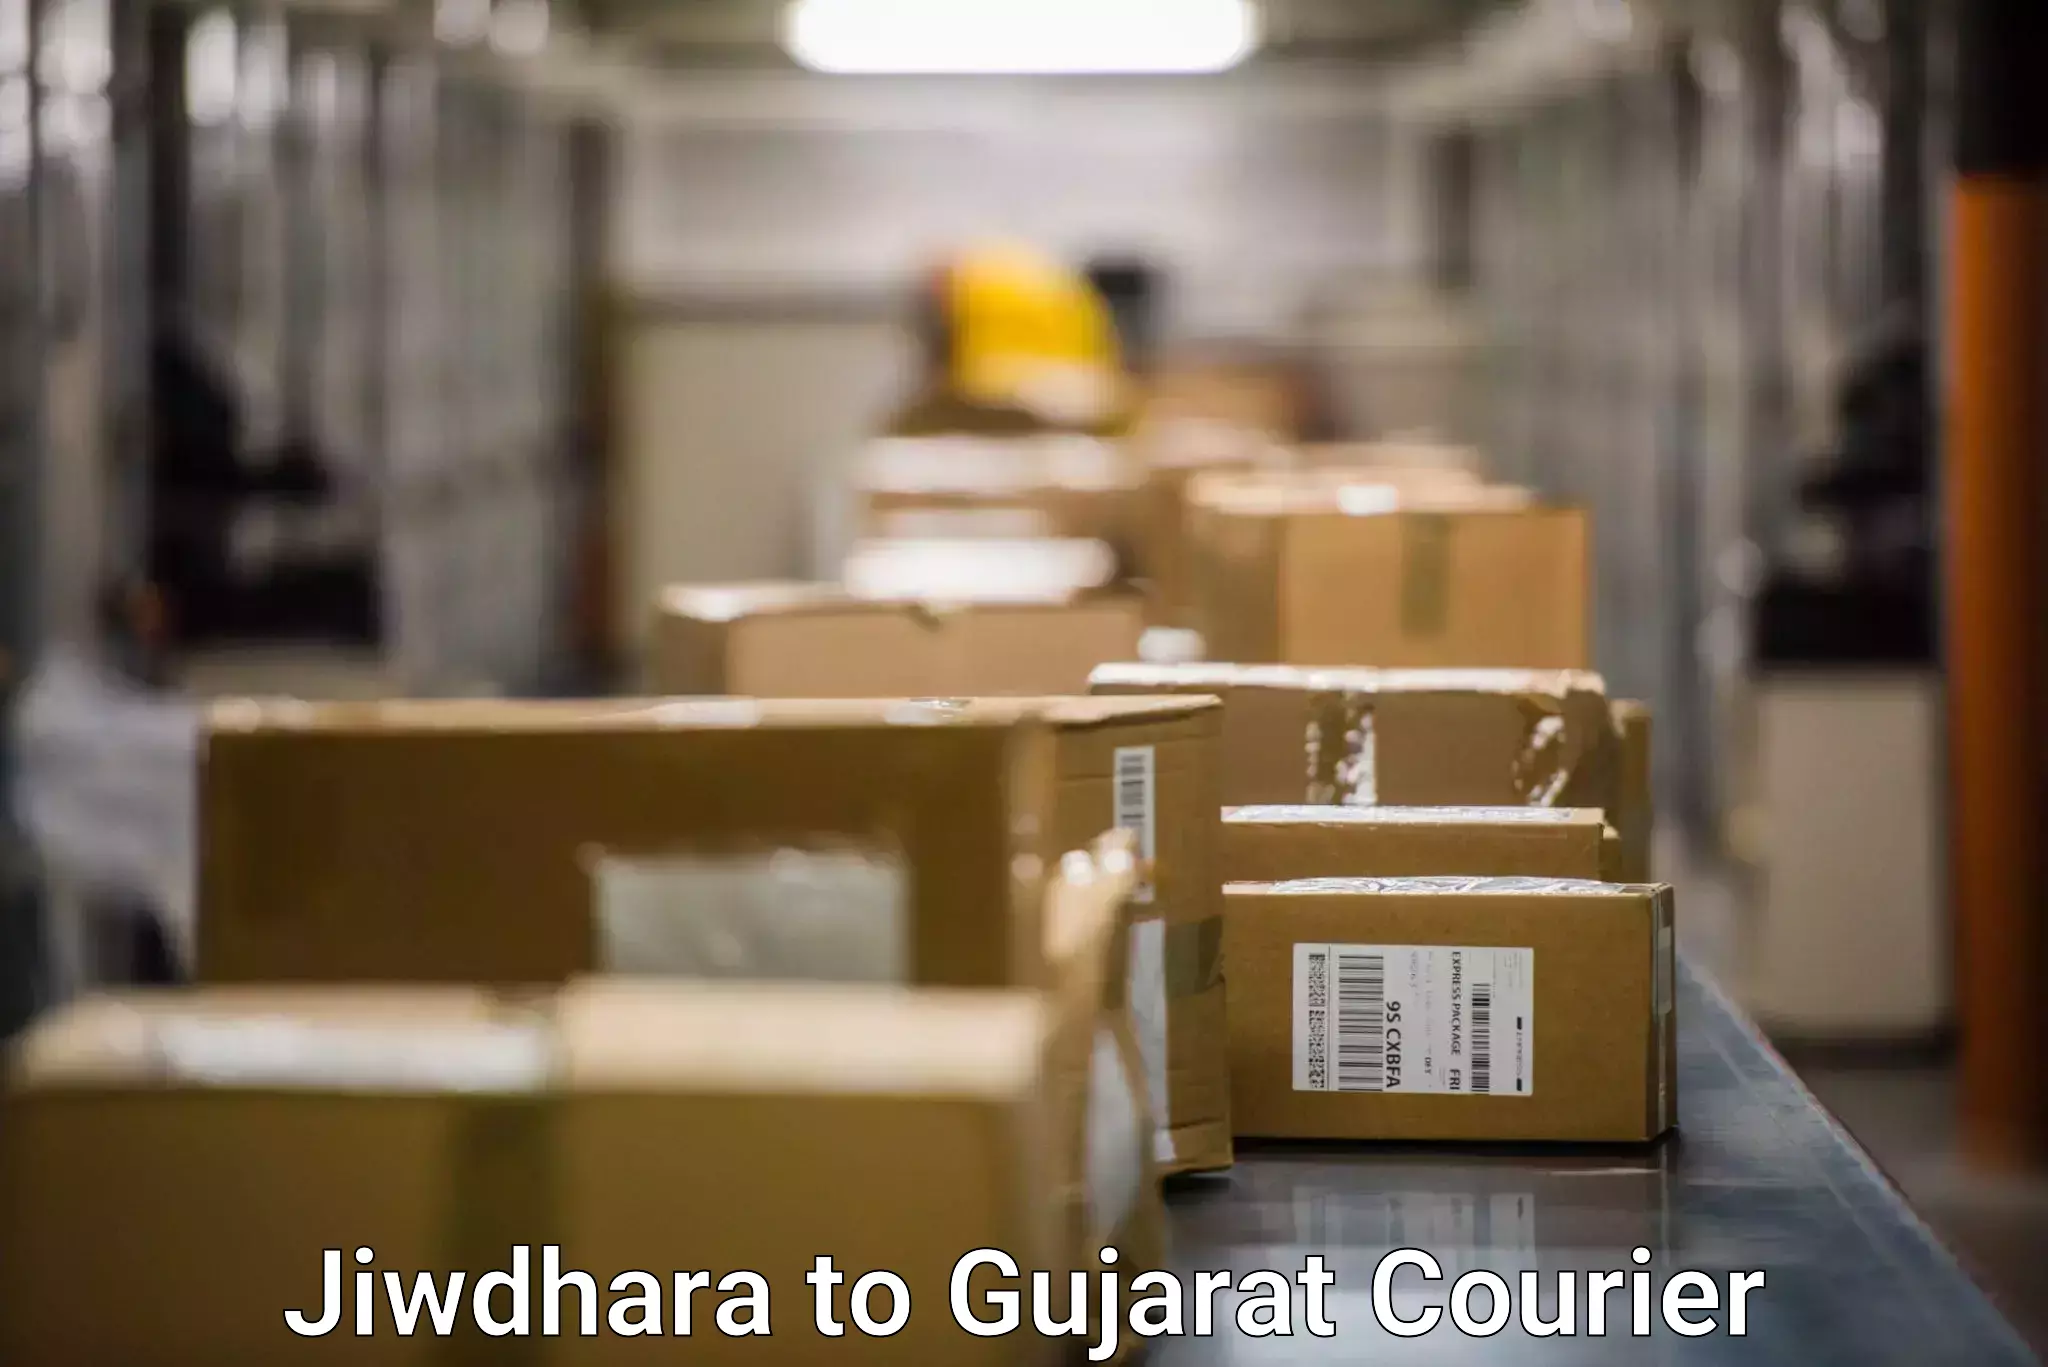 State-of-the-art courier technology Jiwdhara to Tharad